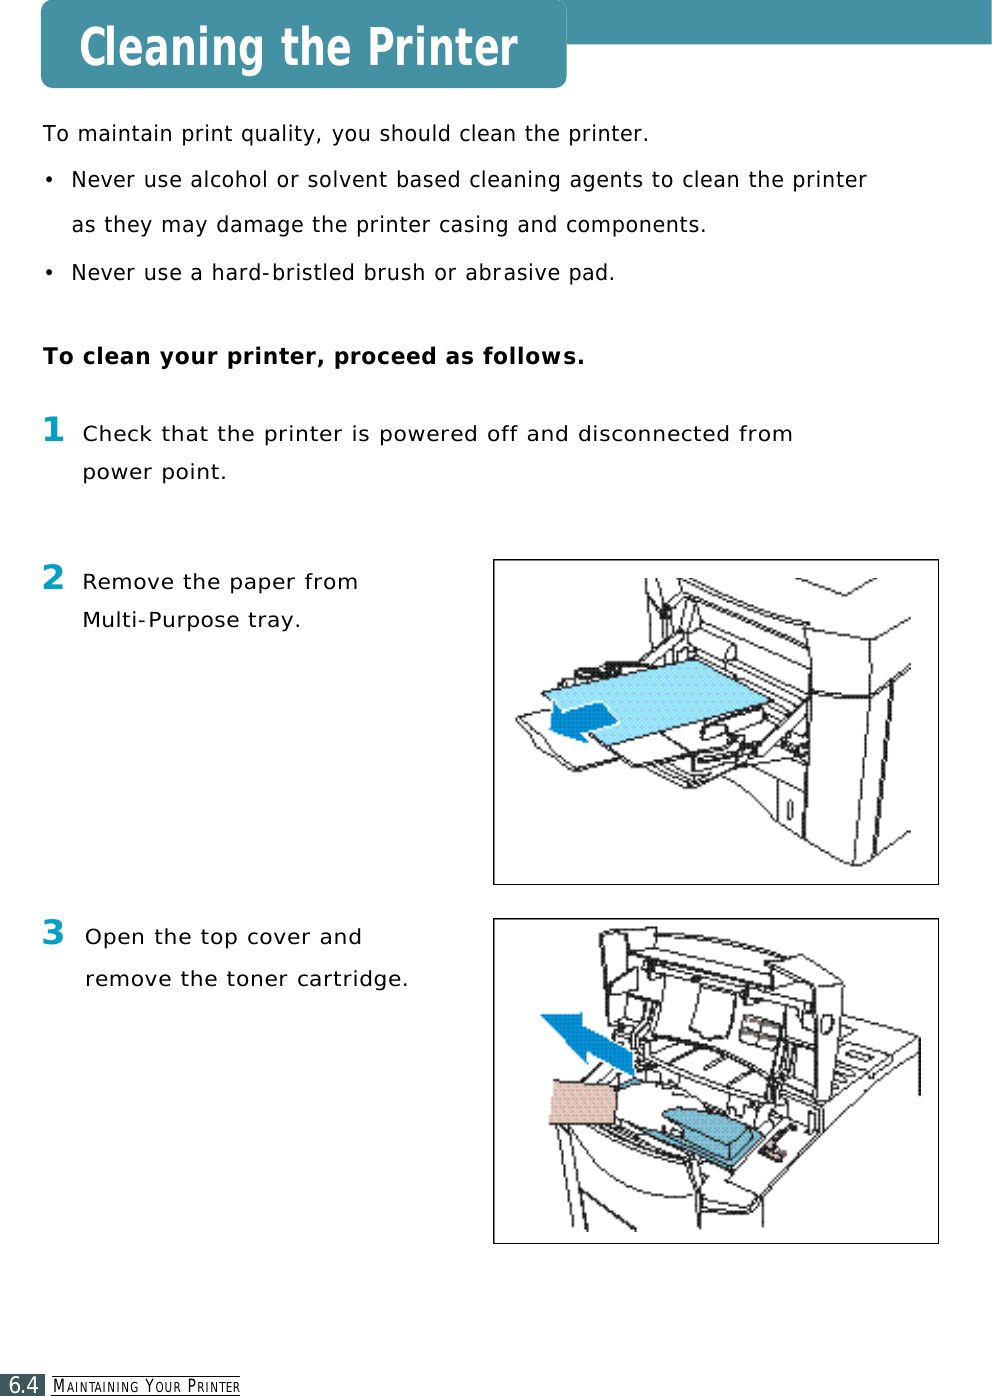 MA I N TA I N I N G YO U R PR I N T E R6.4Cleaning the PrinterTo maintain print quality, you should clean the printer.•  N e ver use alcohol or solvent based cleaning agents to clean the printeras they may damage the printer casing and components.•  N e ver use a hard-bristled brush or abra s i v e pad. To clean your printer, proceed as follows.2Re m ove the paper from Multi-Purpose tray.3Open the top cover andr e m ove the toner cartridge.1Check that the printer is powered off and disconnected frompower point.